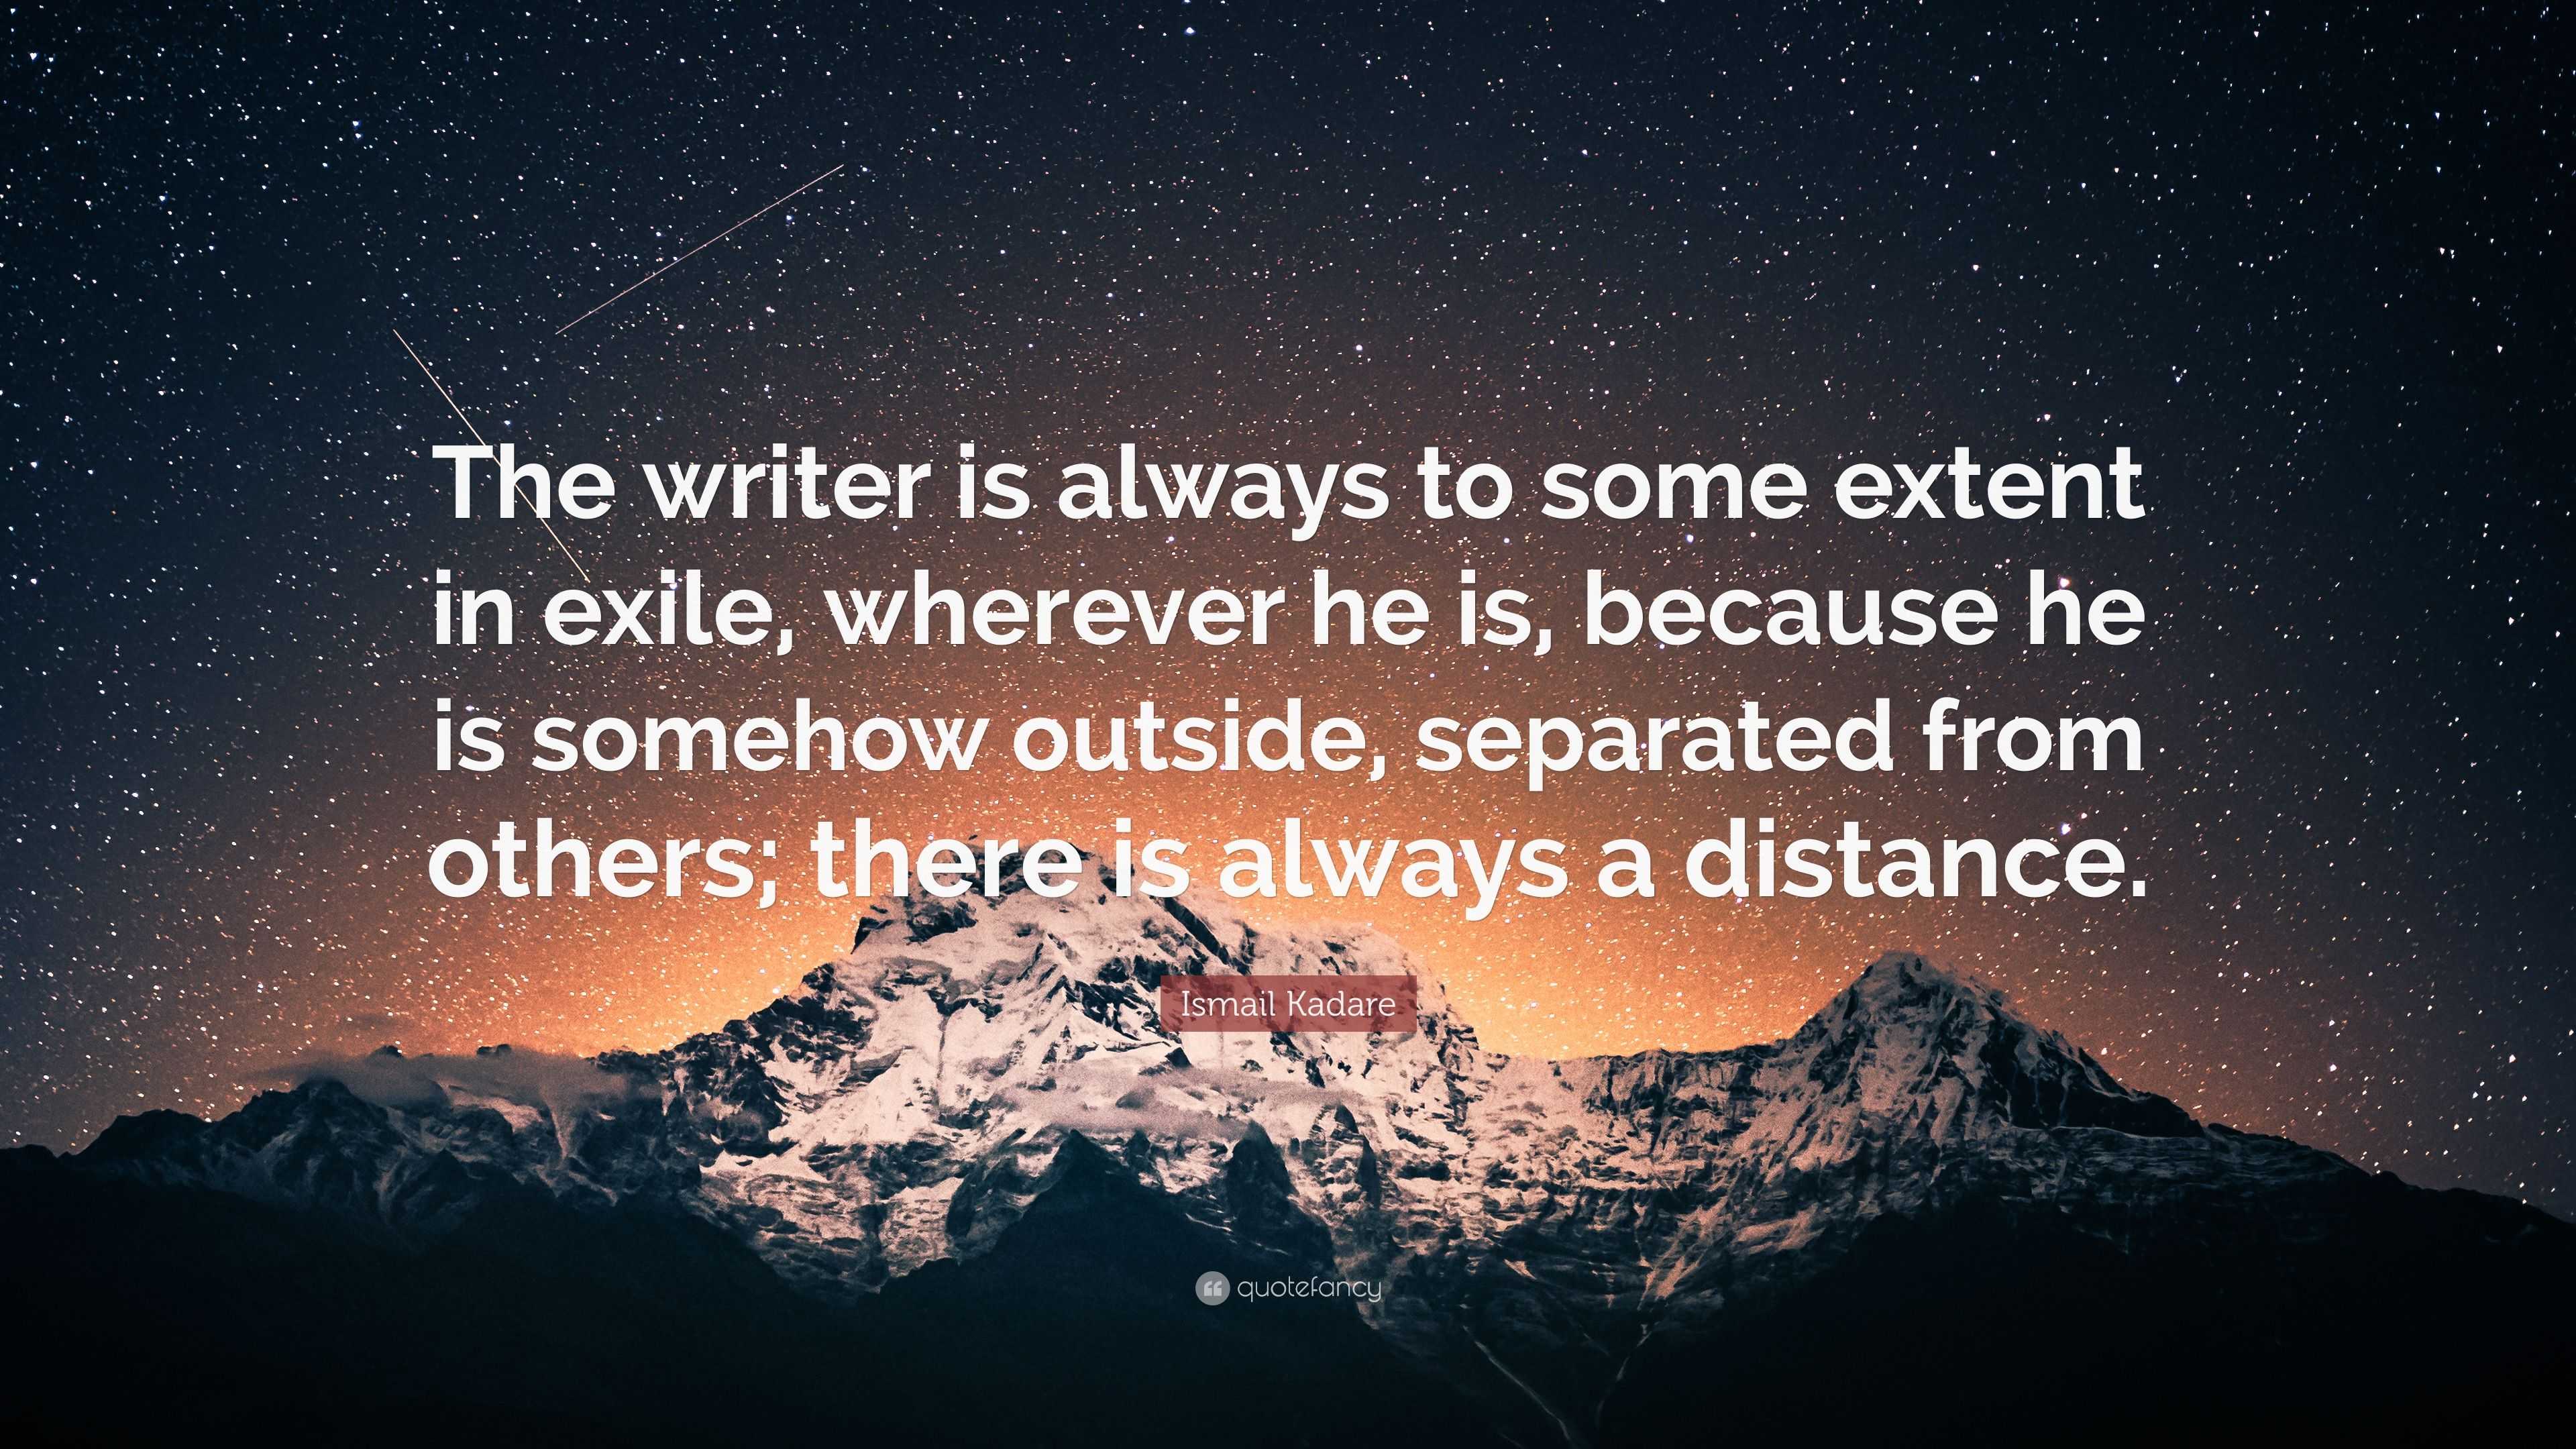 Ismail Kadare Quote: “The writer is always to some extent in exile ...